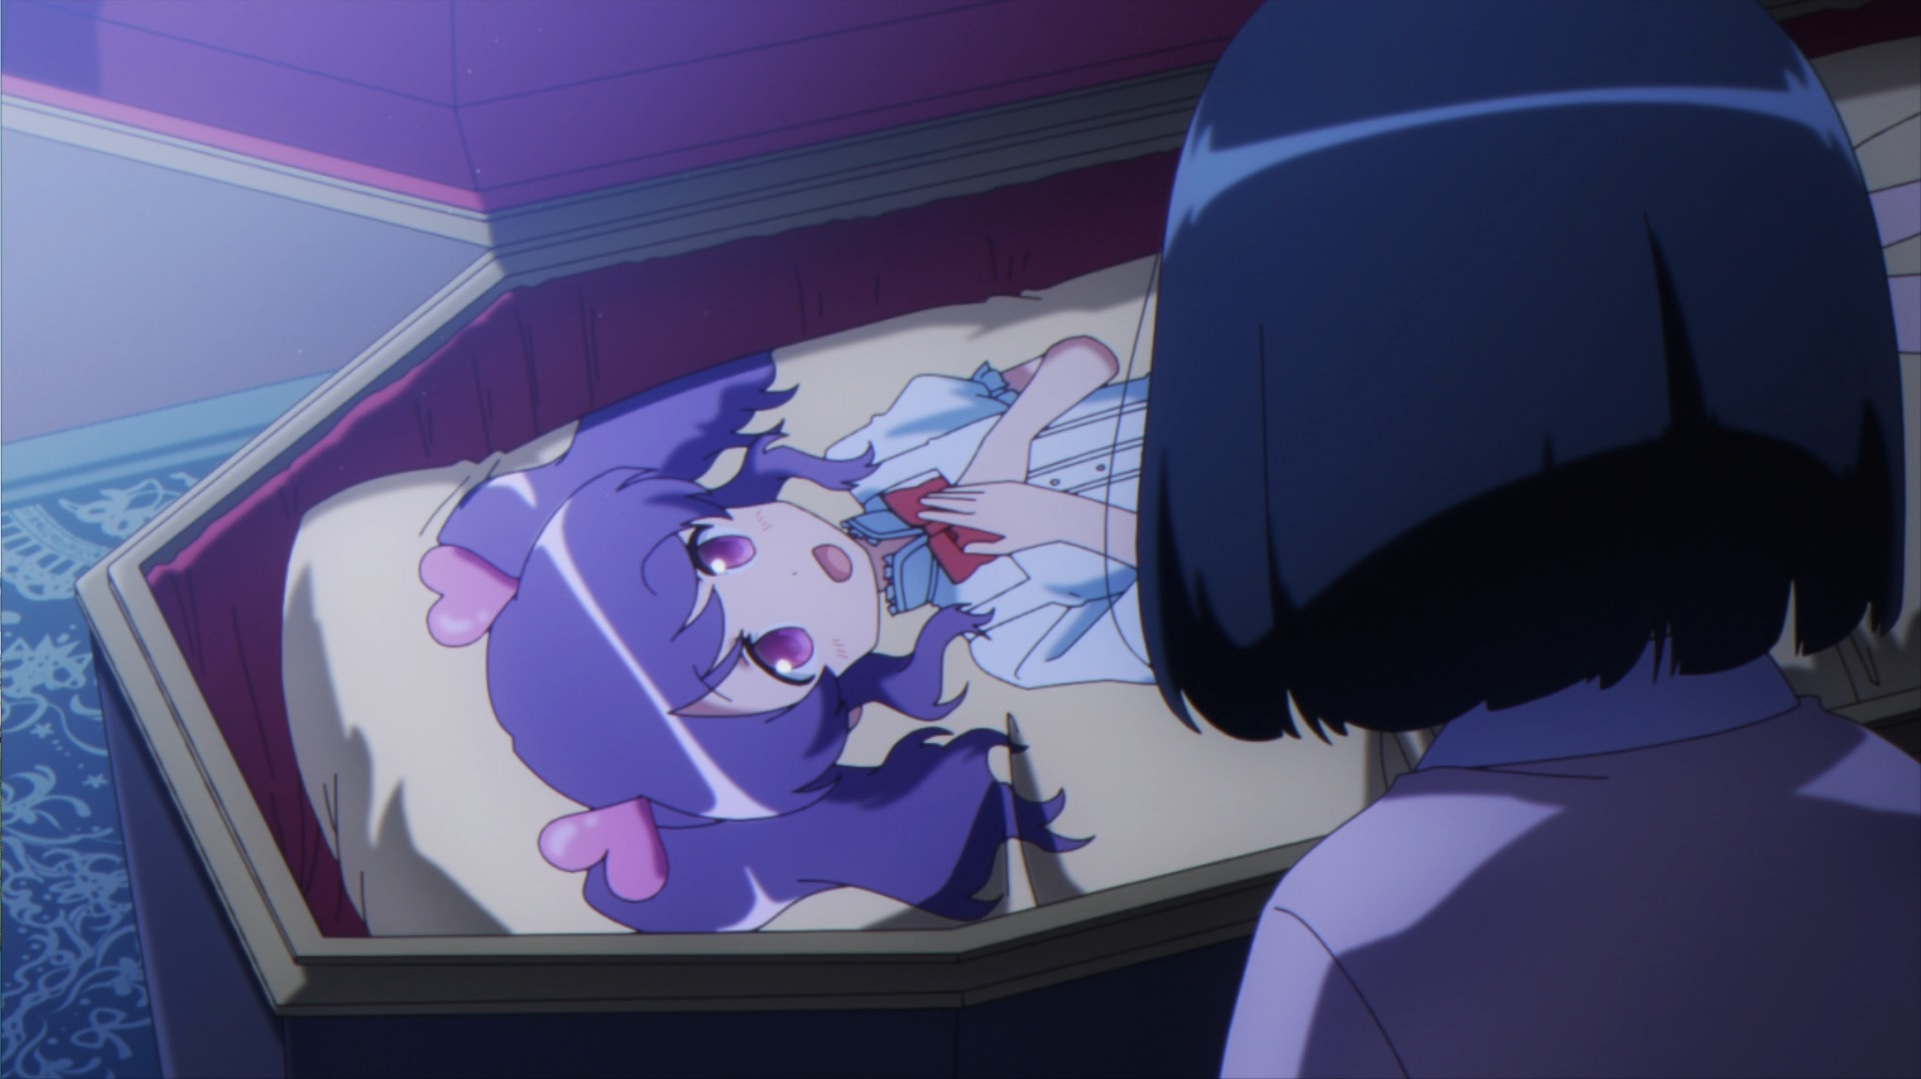 Akari Amano discovers an embarrassing hug pillow inside Sophie's coffin in a scene from the Ms. vampire who lives in my neighborhood. TV anime.